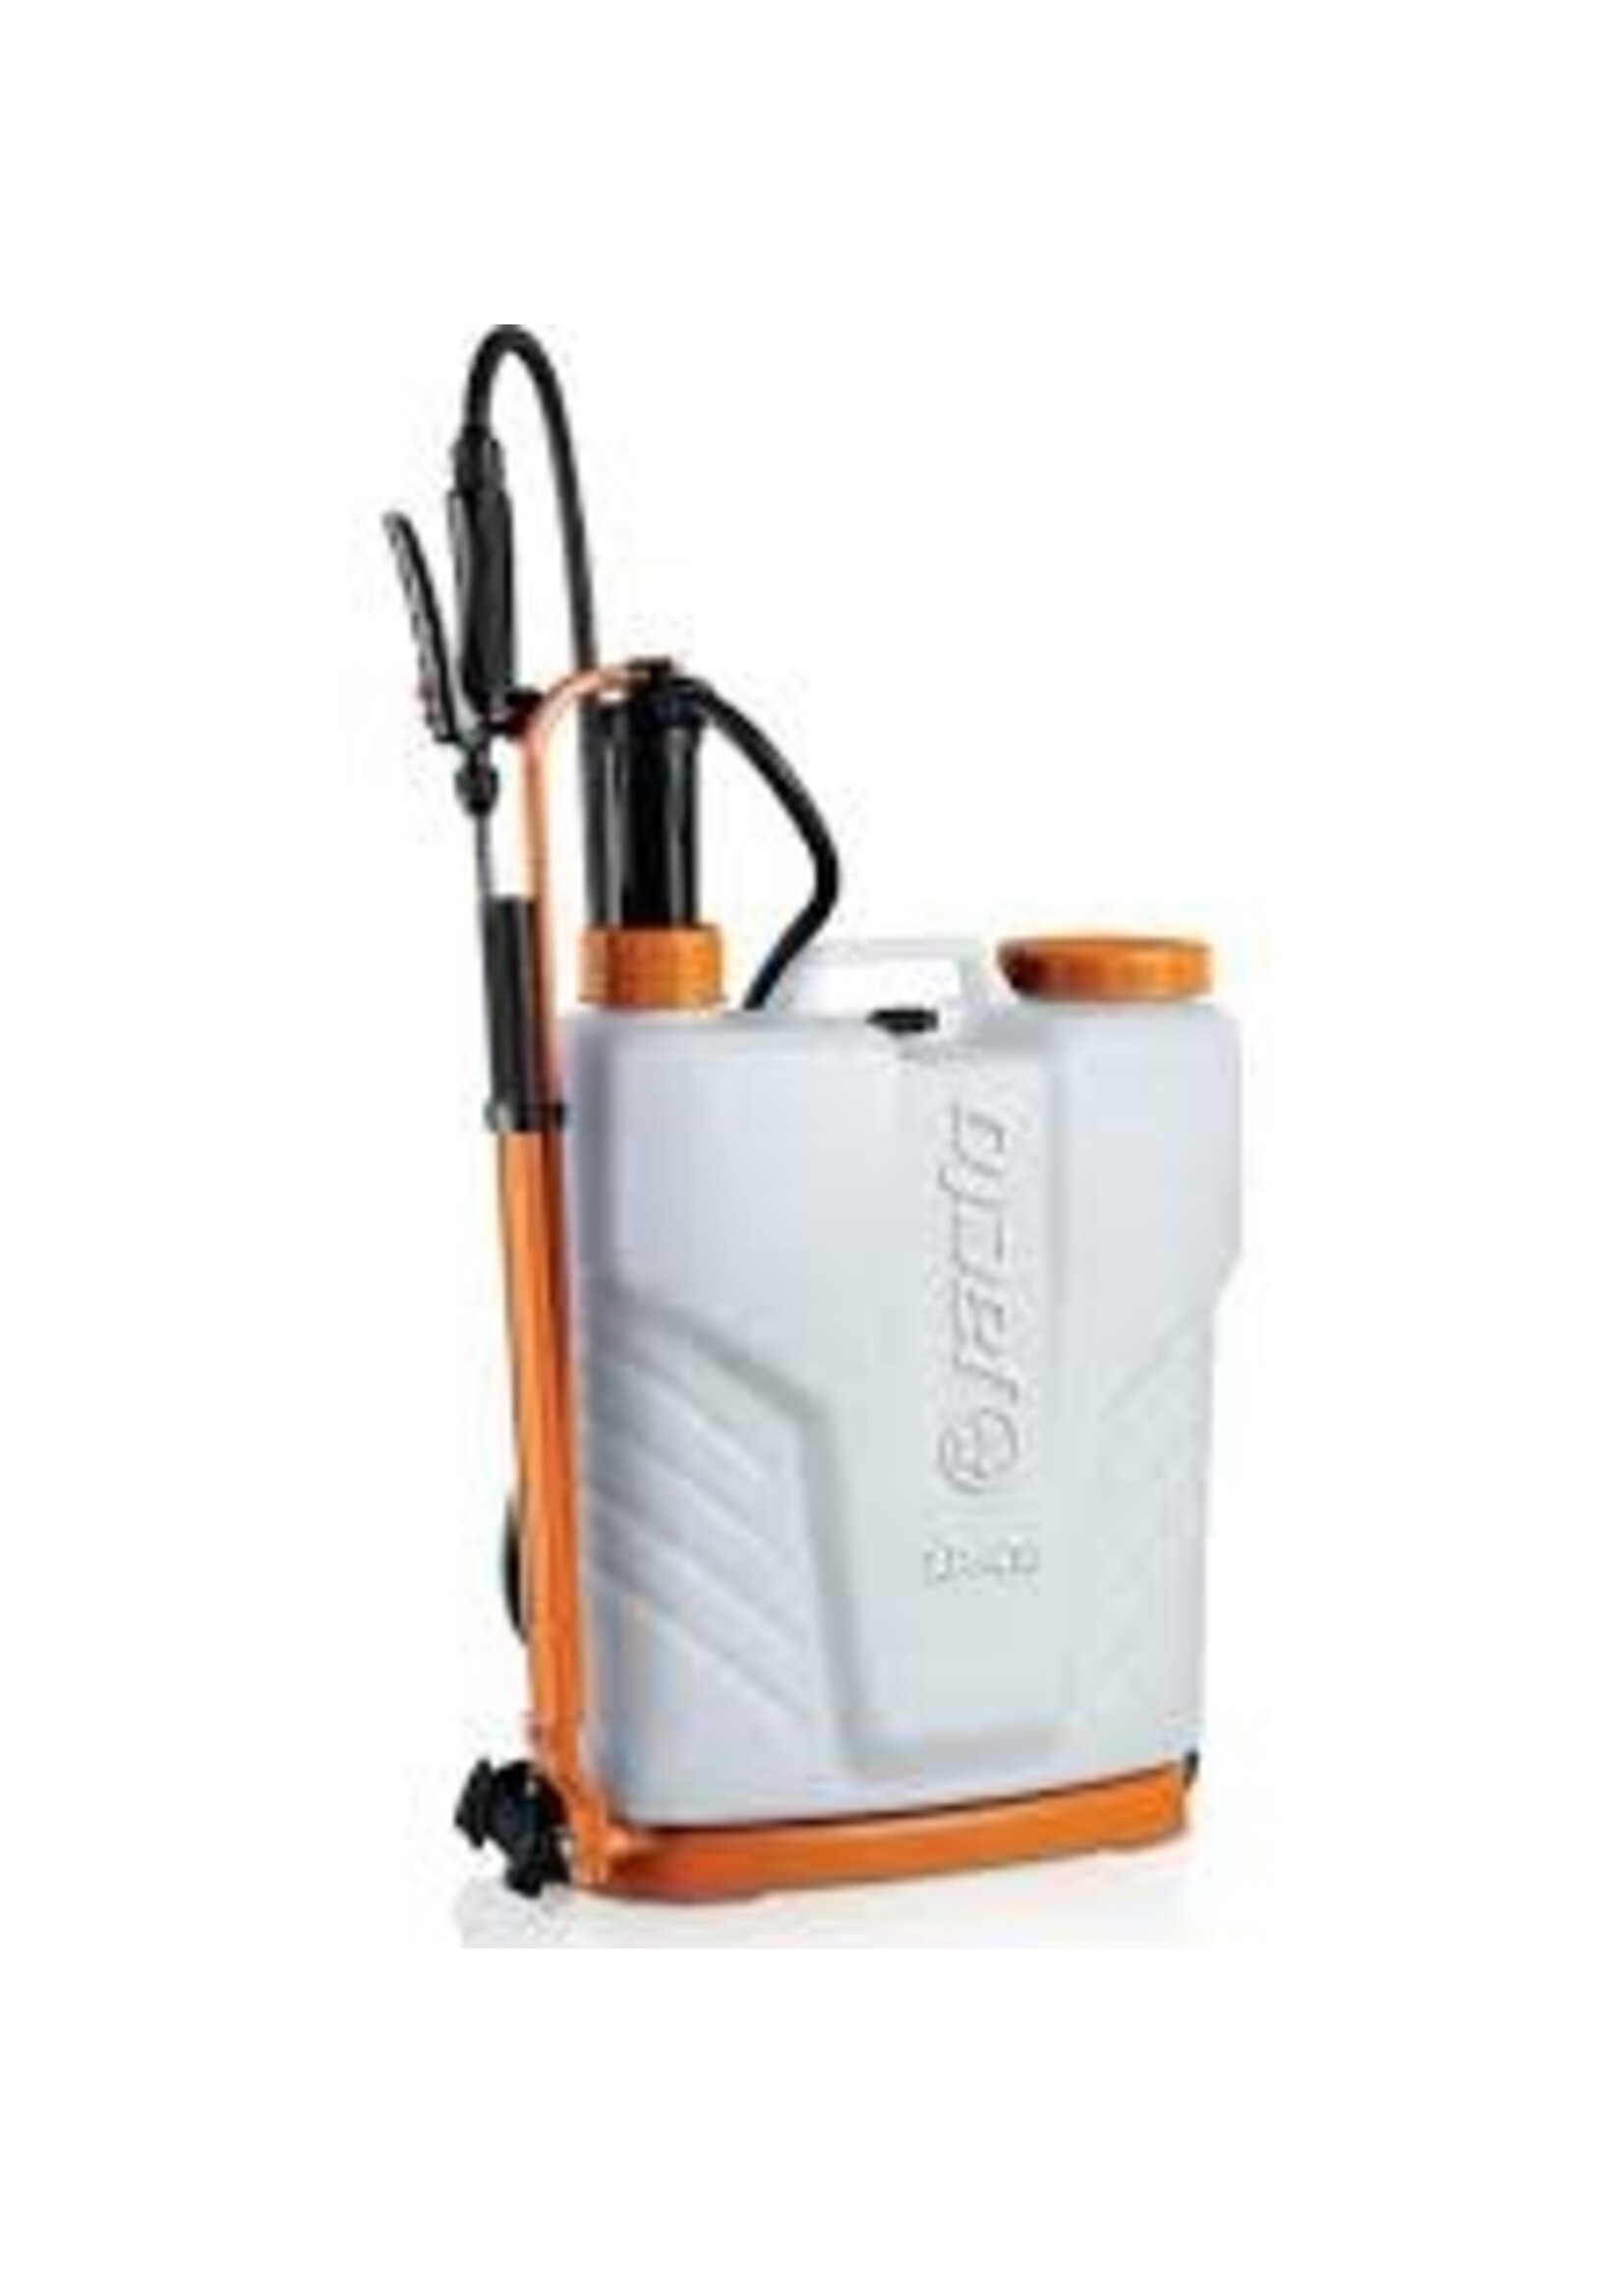 jacto Jacto Backpack Sprayer XP-416 - 4 gal, White